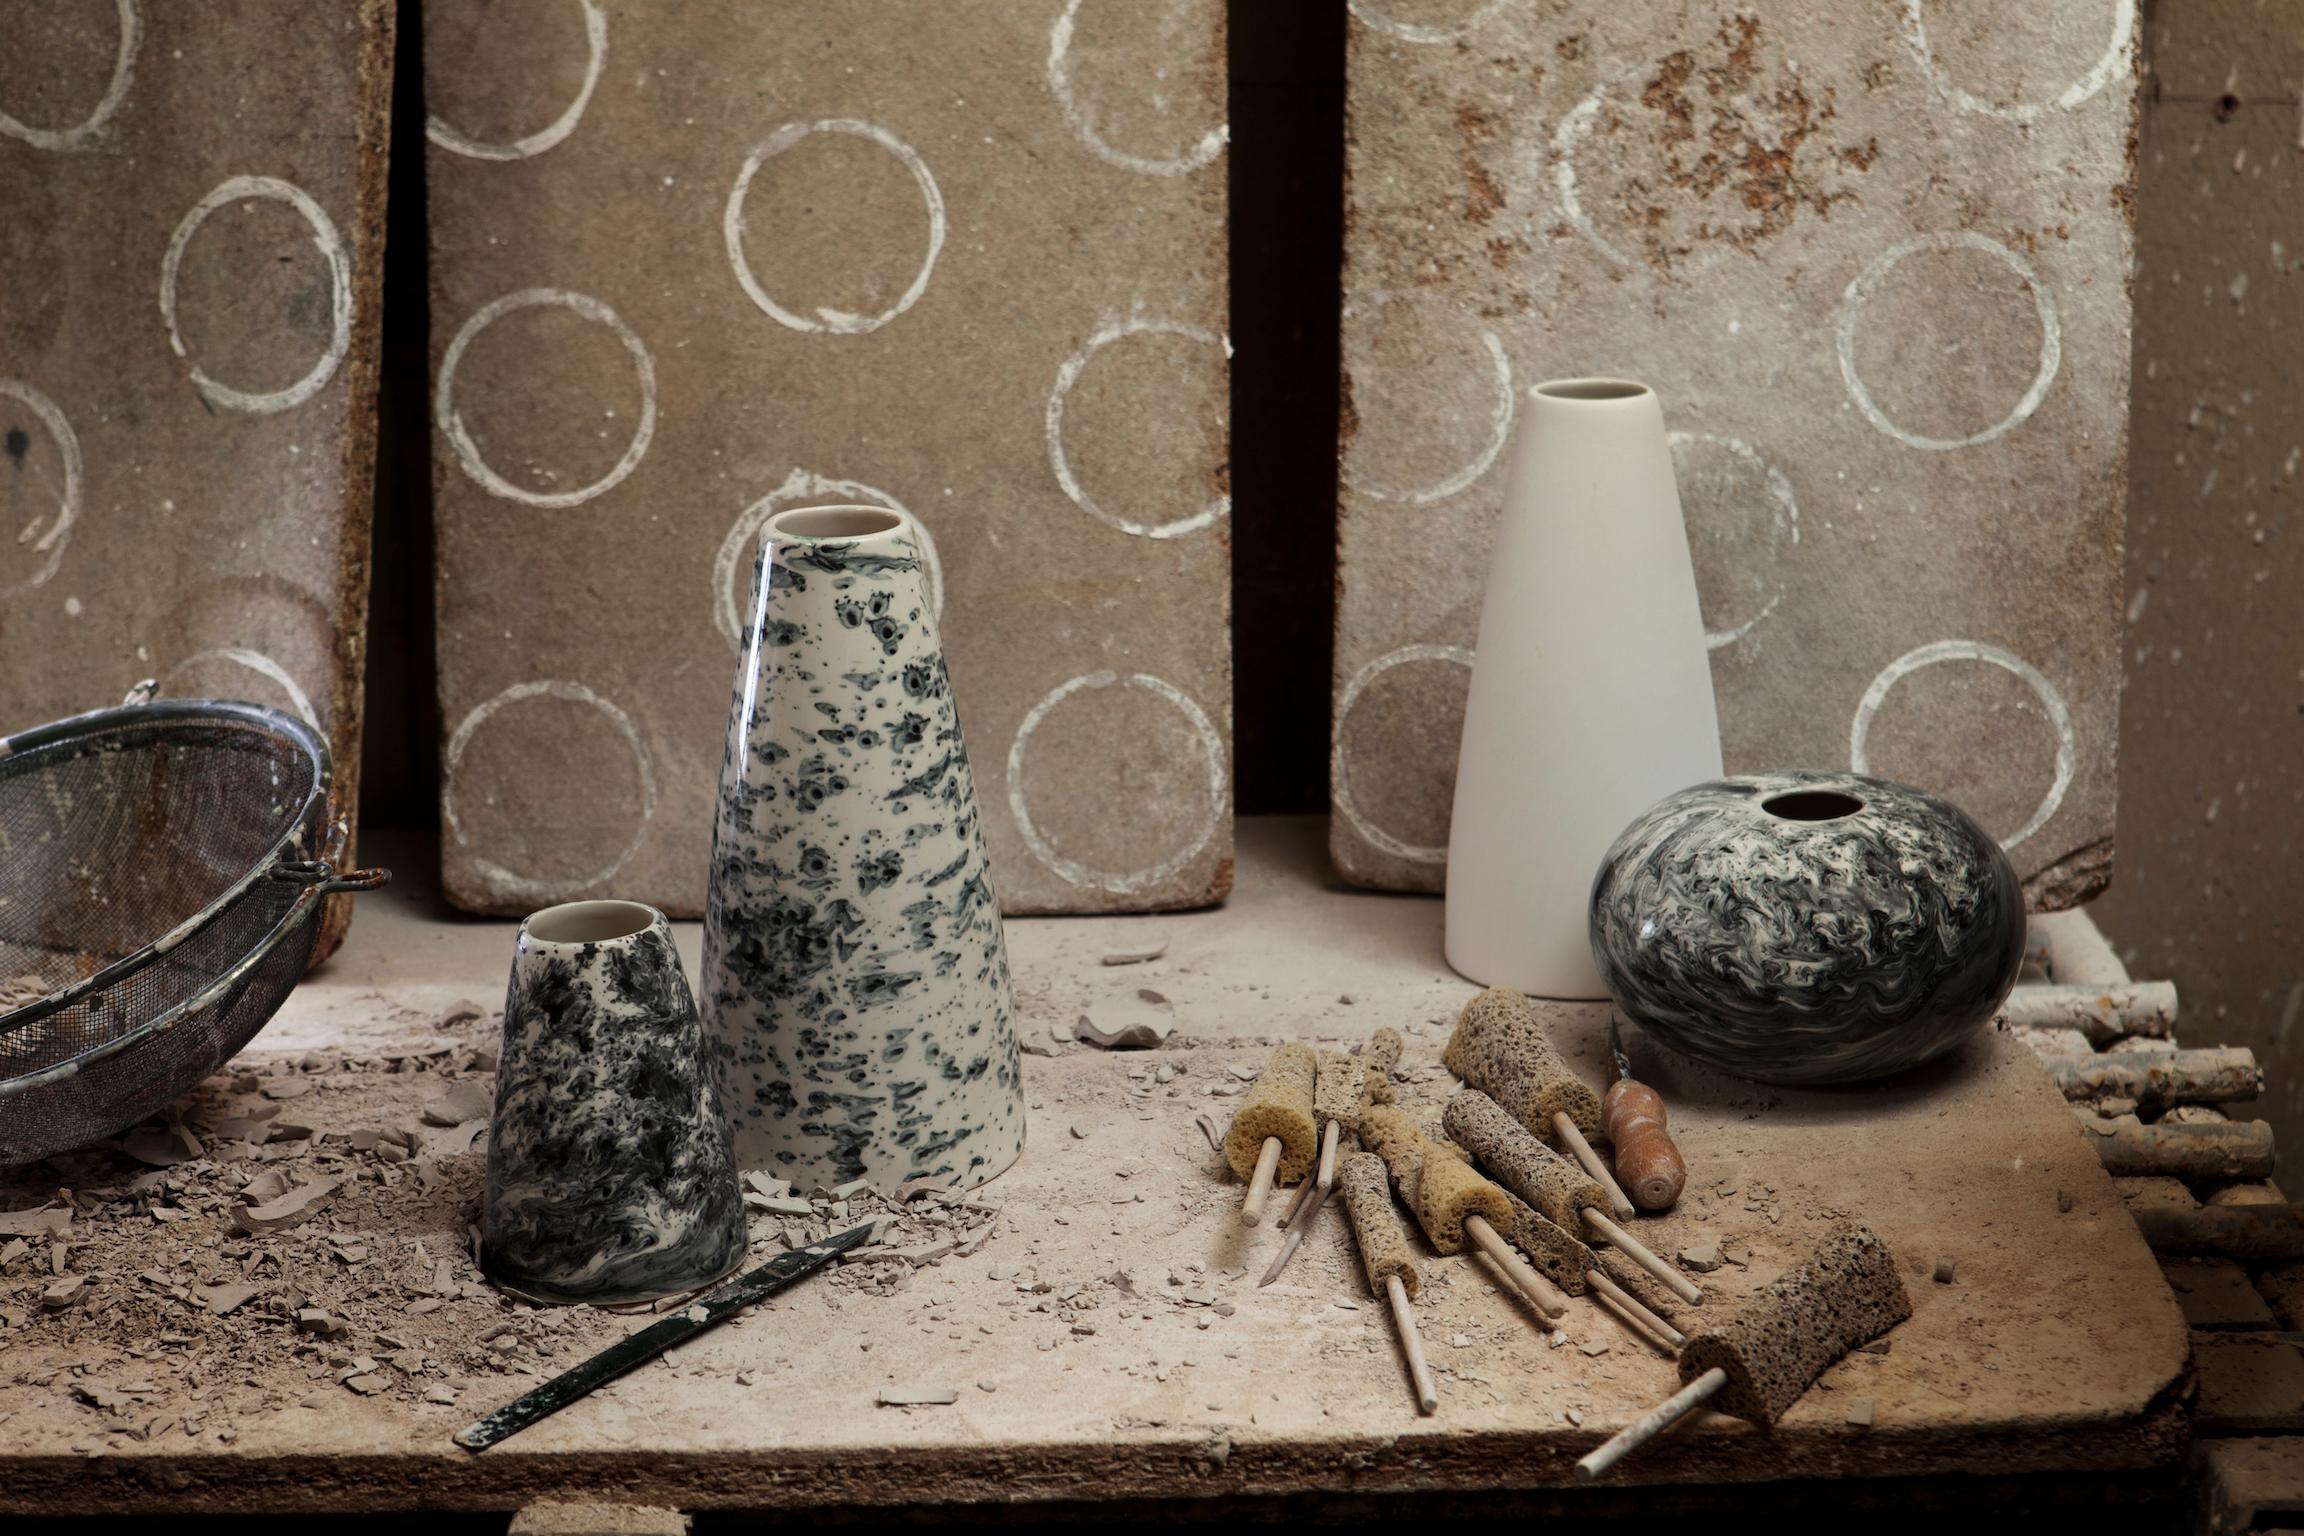 Slick additions, 1882 Ltd. Slick and Sleet by 1882 Ltd. with an extended vase collection by Queensberry Hunt is a collection of uniquely hand glazed items, a true testament to the skill of the Potter. So many factors make up the pattern of the